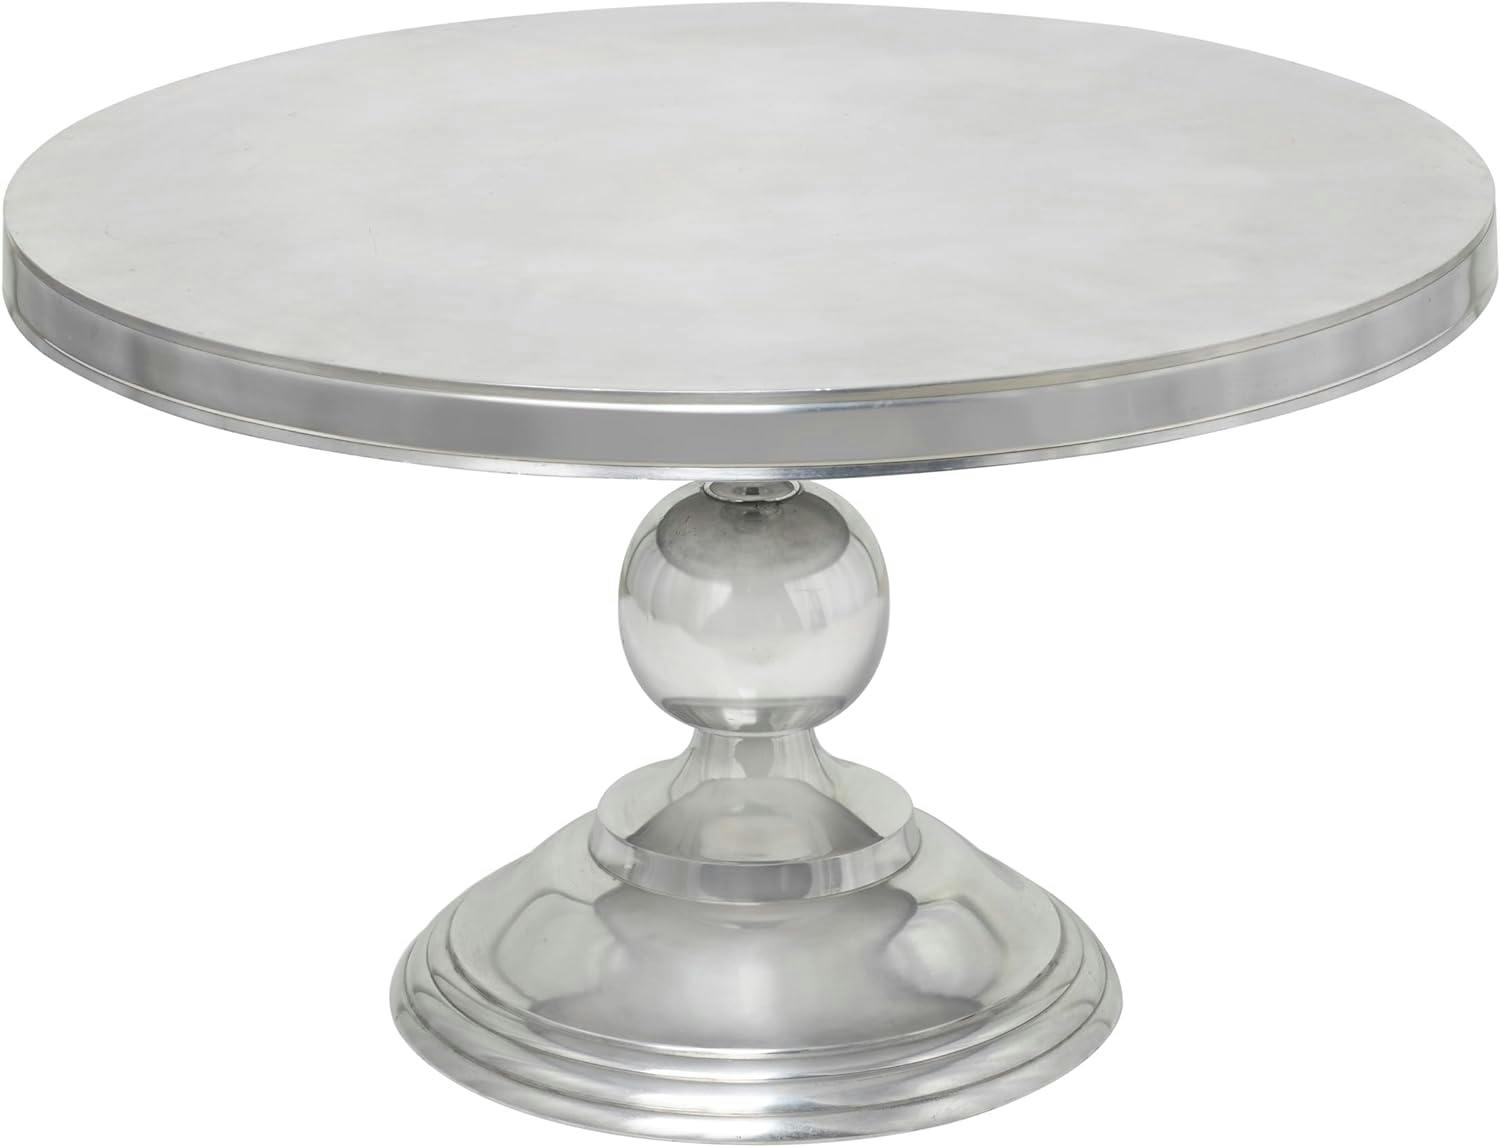 Elegant Goblet-Inspired Round Metal Coffee Table in Silver Finish